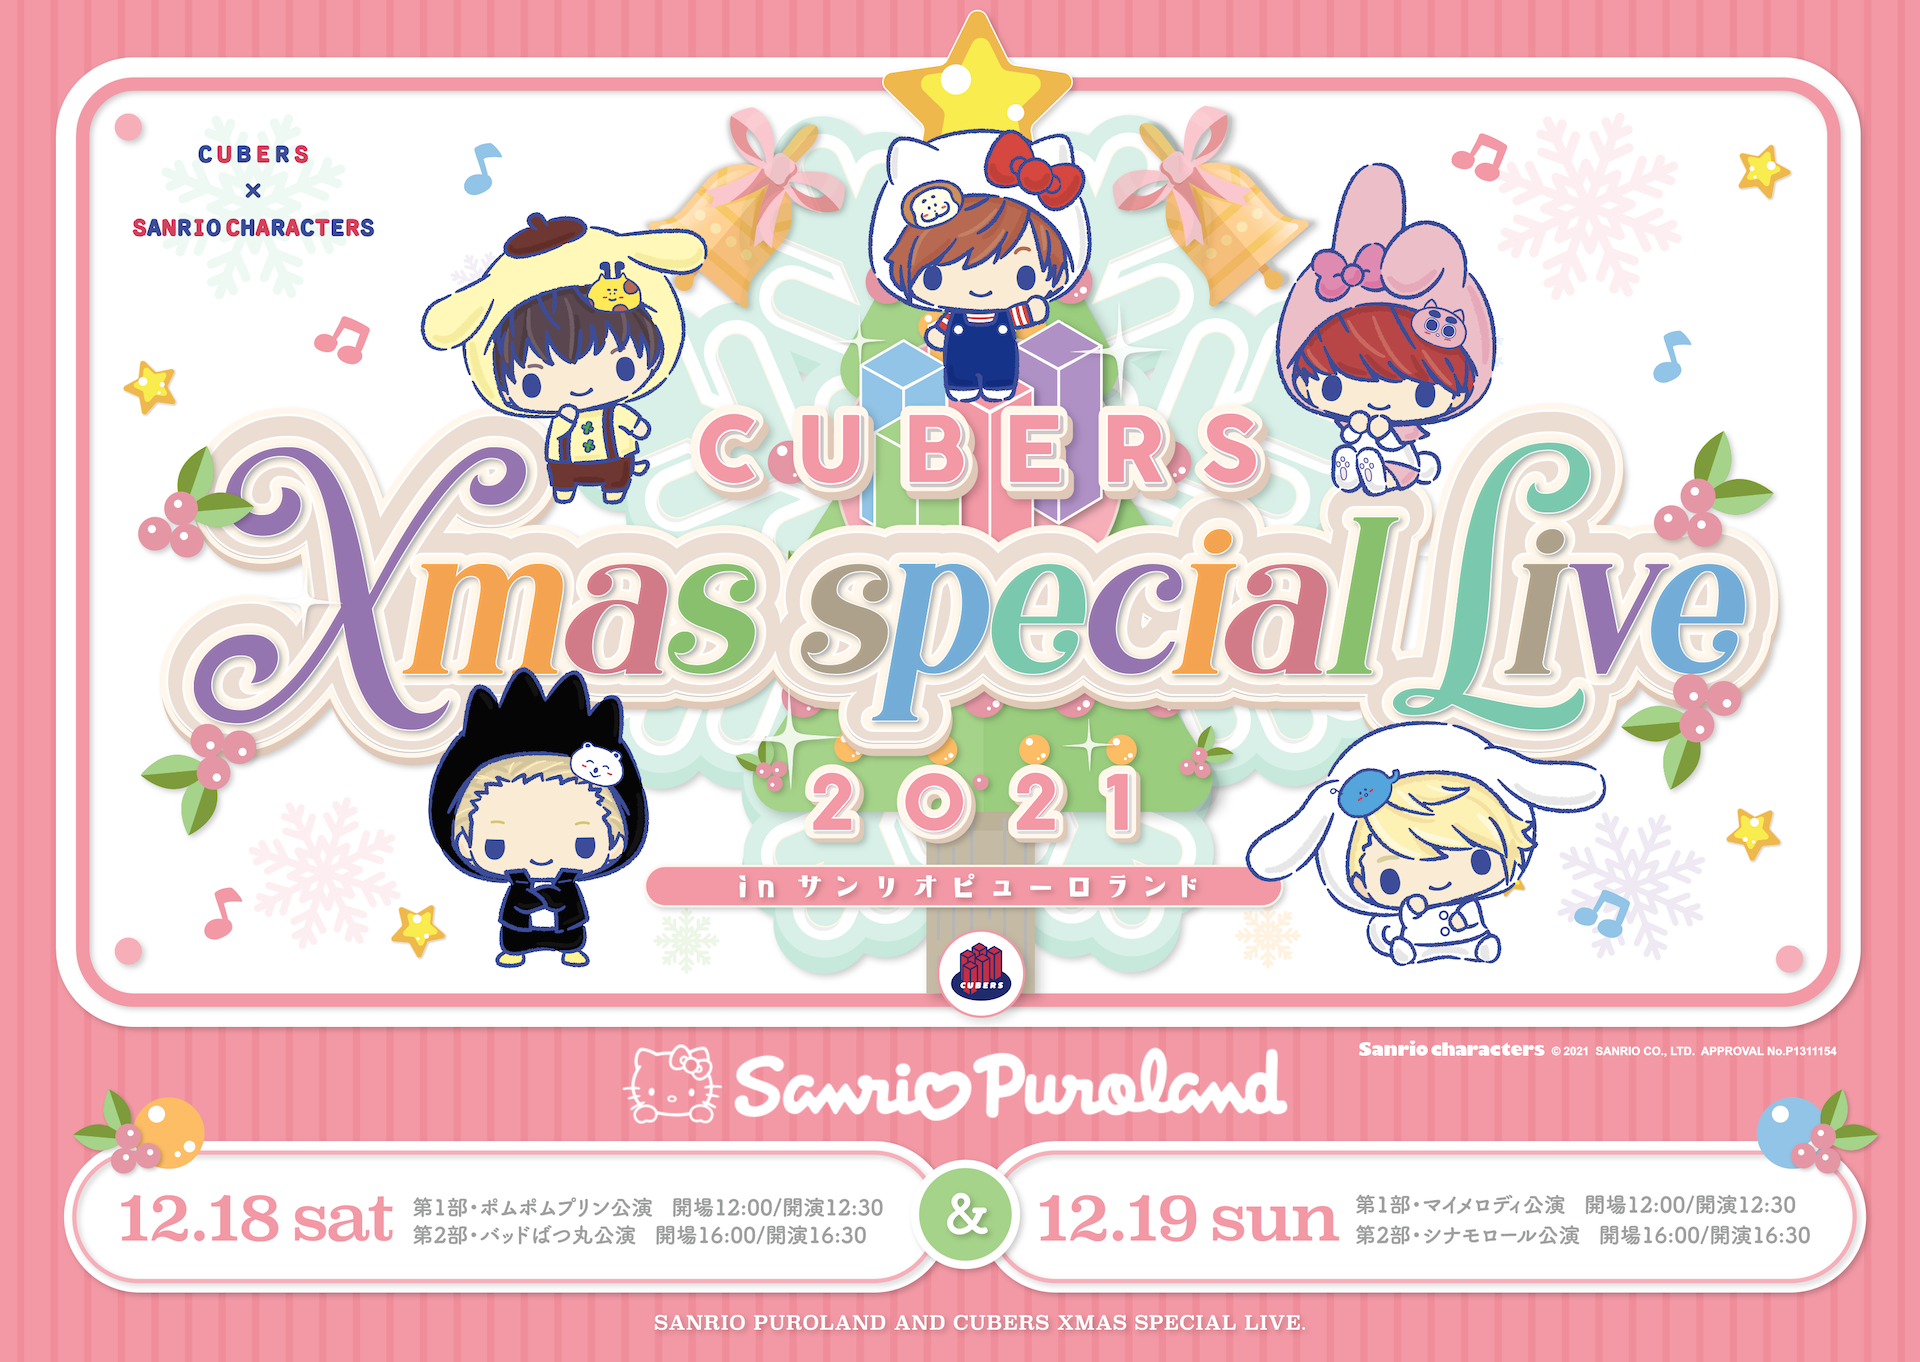 【NEWS】「CUBERS Xmas Special Live 2021 in サンリオピューロランド」イベントPOP解禁！